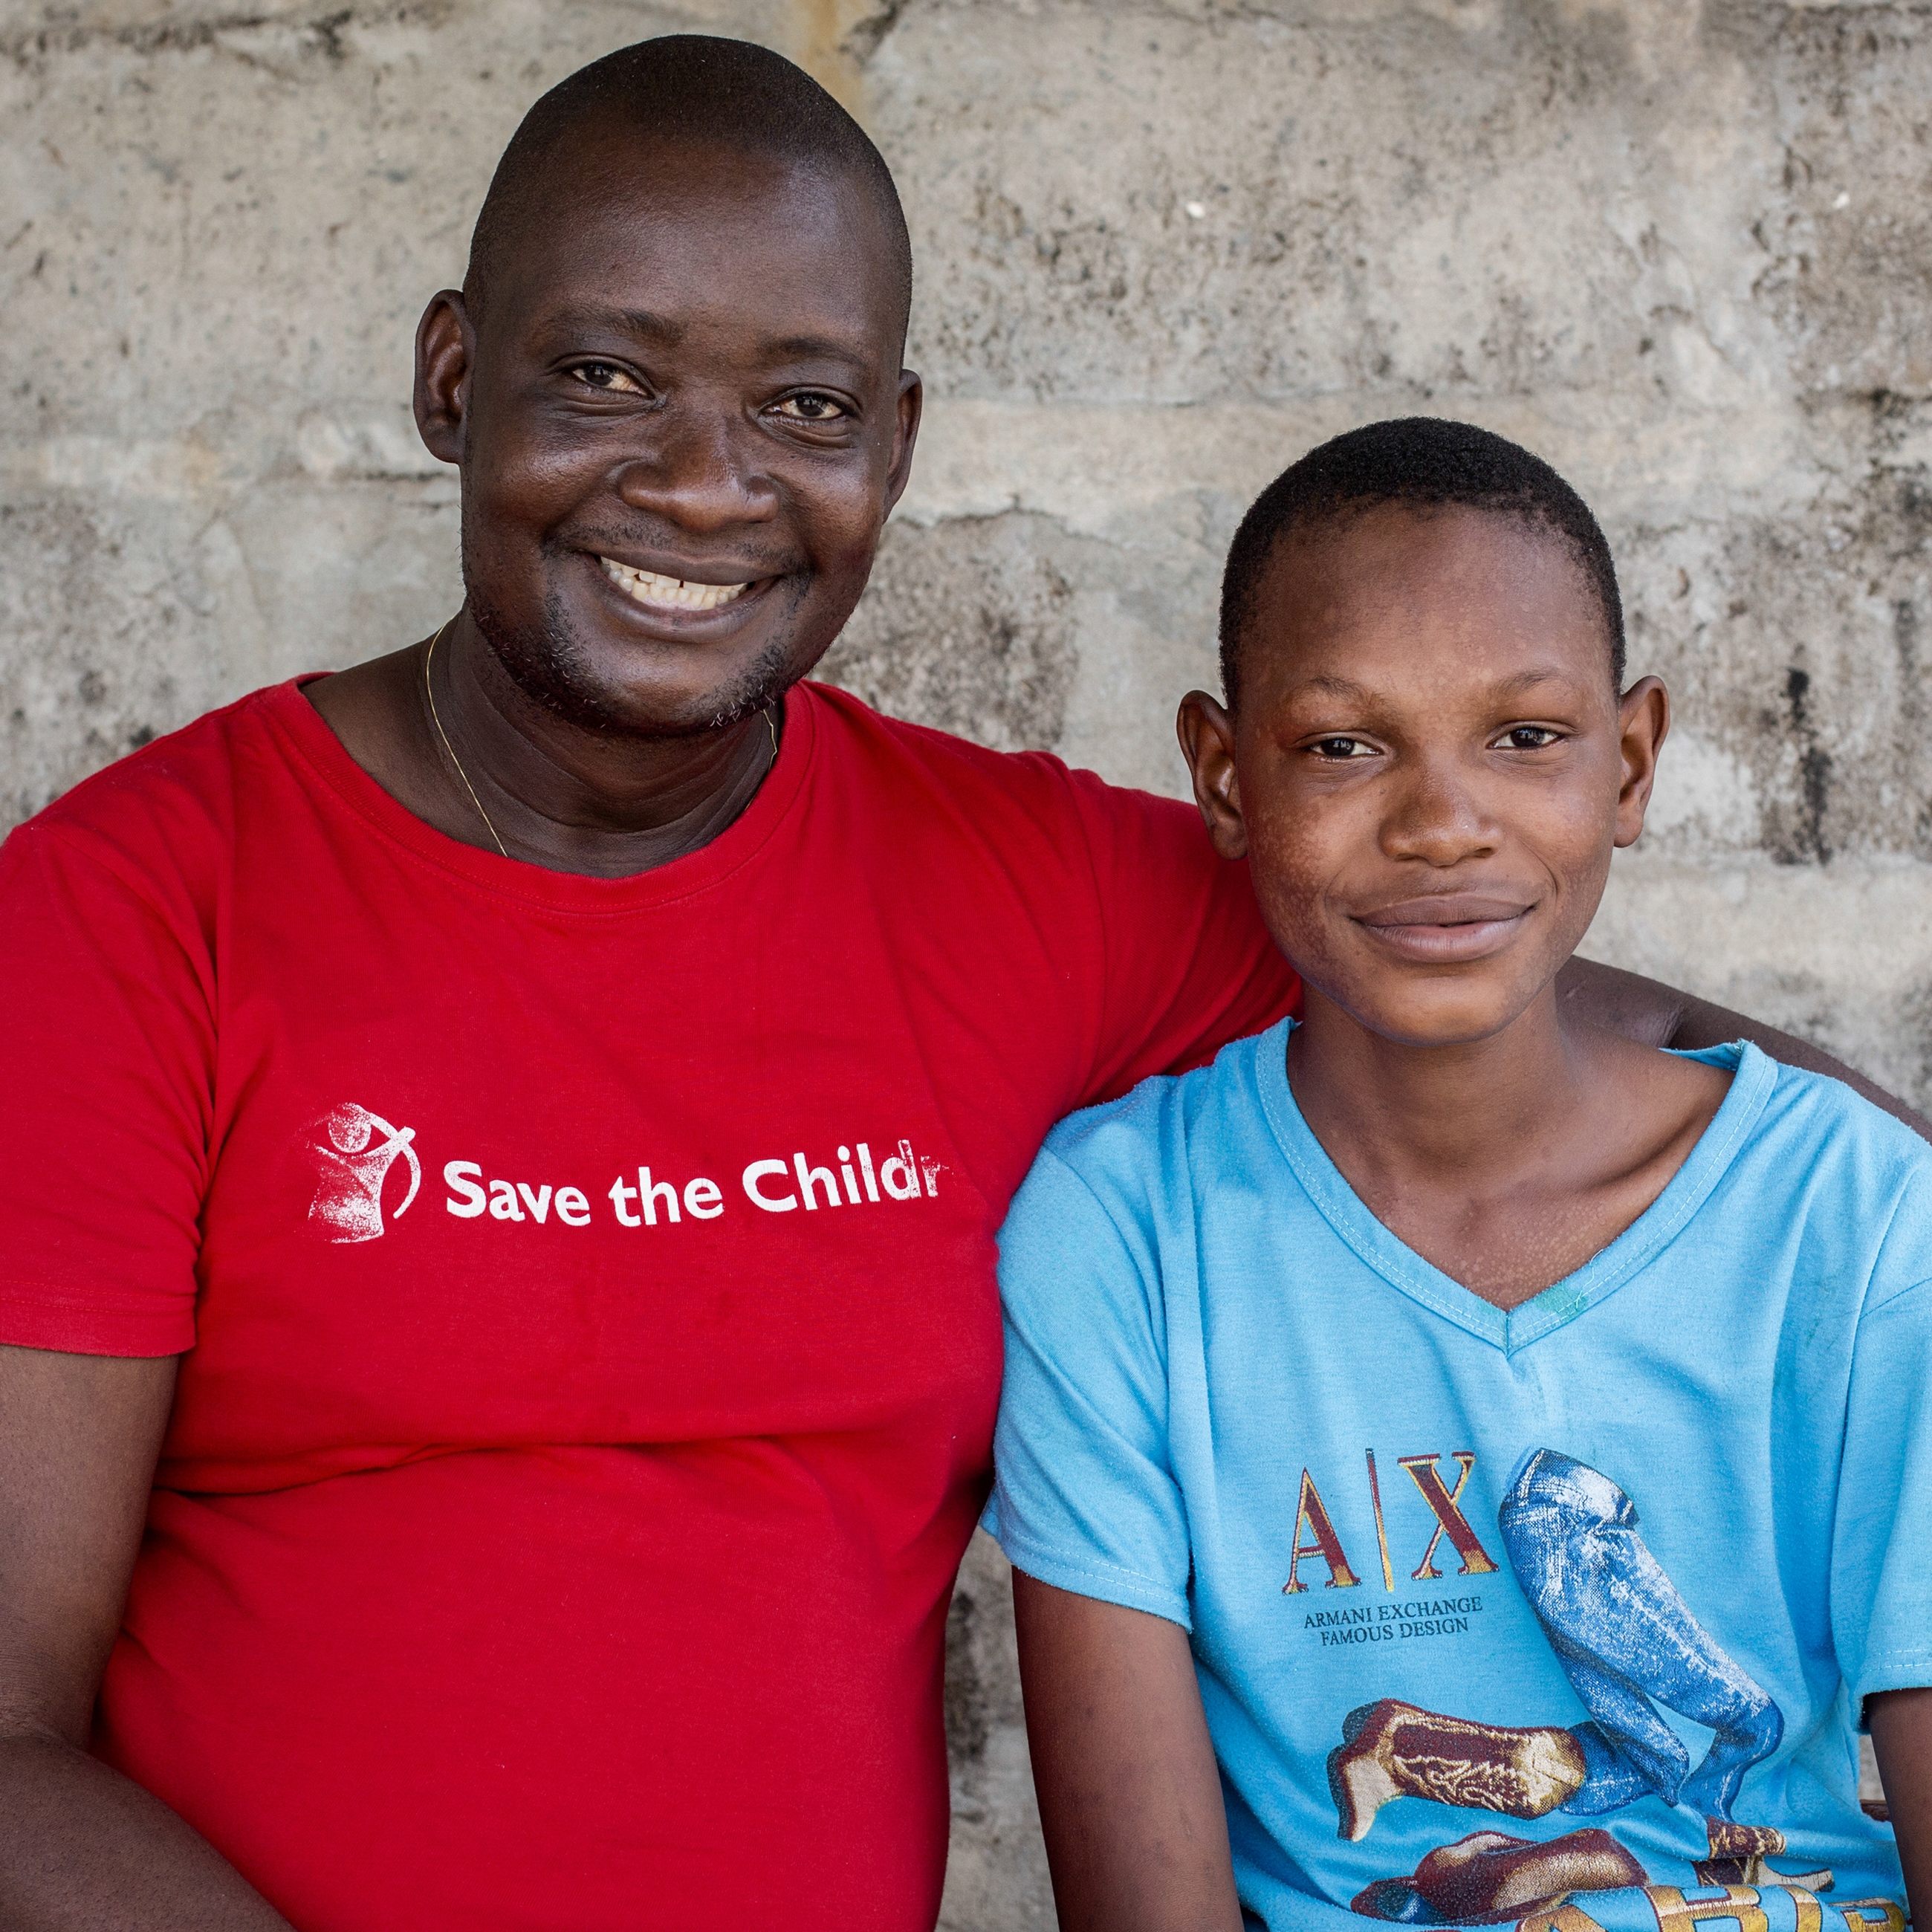 Child protection officer, Konday Marah, and 16-year-old Ebola survivor Joshua* sit outside a Save the Children field office in Sierra Leone. Thanks to the regular visits with Konday and our work to help reintegrate children who have survived Ebola back into society, Joshua’s life is returning to that of a typical 16-year-old boy. Photo Credit: Jonathan Hyams/Save the Children 2015.